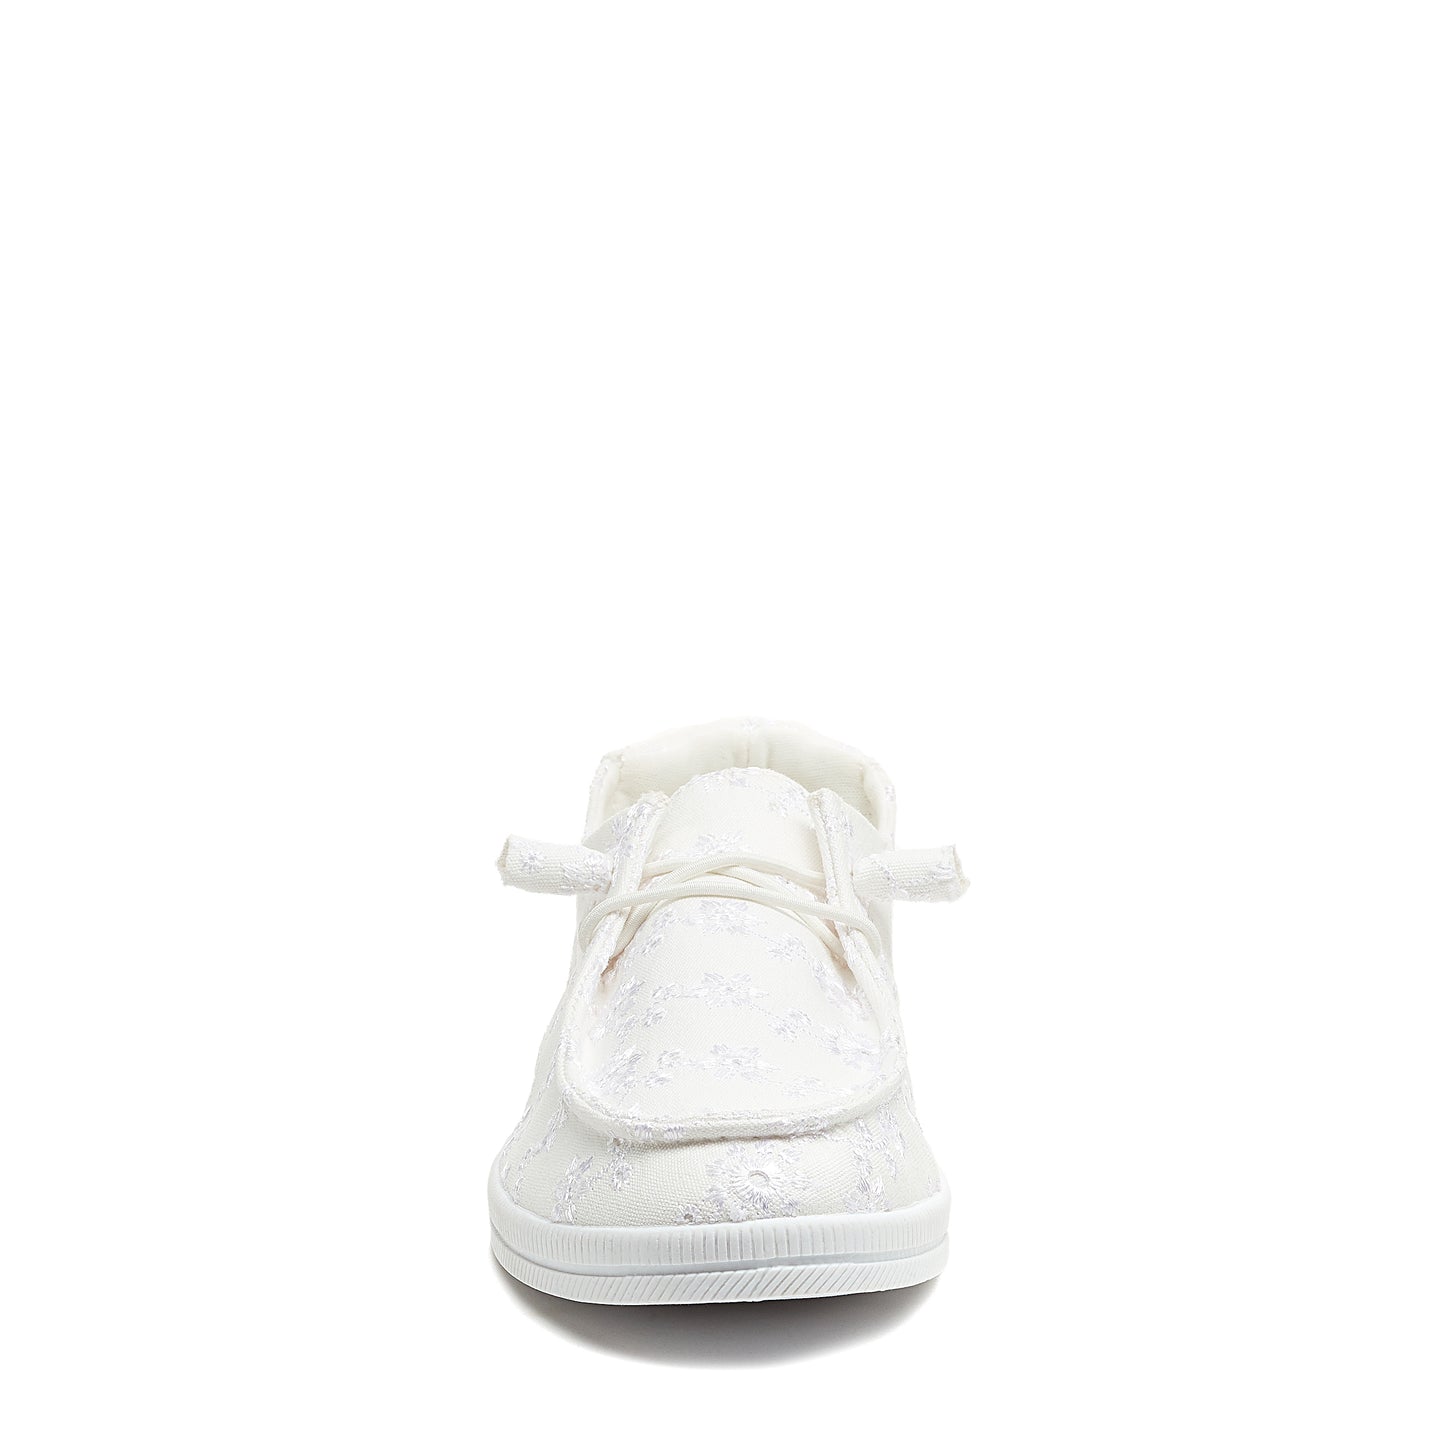 Mellow White Eyelet Slip-On Casual Shoes